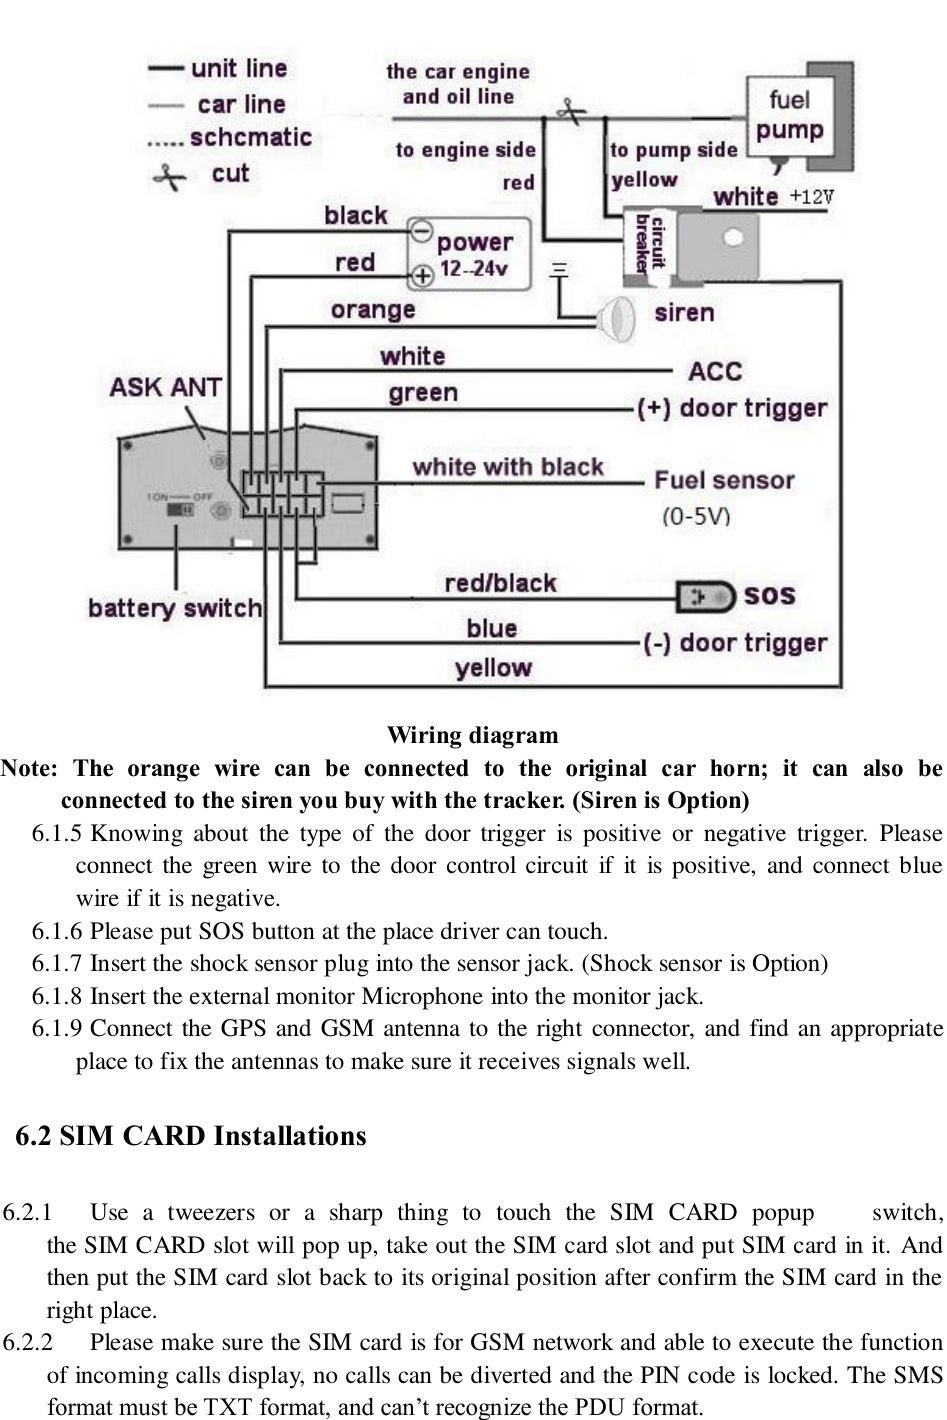    Wiring diagram Note:  The  orange  wire  can  be  connected  to  the  original  car  horn;  it  can  also  be connected to the siren you buy with the tracker. (Siren is Option)   6.1.5 Knowing  about  the  type  of  the  door  trigger  is  positive  or  negative  trigger.  Please connect the  green wire  to the door  control  circuit  if  it  is positive,  and connect  blue wire if it is negative. 6.1.6 Please put SOS button at the place driver can touch. 6.1.7 Insert the shock sensor plug into the sensor jack. (Shock sensor is Option)   6.1.8 Insert the external monitor Microphone into the monitor jack. 6.1.9 Connect the GPS and GSM antenna to the right connector, and find an appropriate place to fix the antennas to make sure it receives signals well. 6.2 SIM CARD Installations 6.2.1 Use  a  tweezers  or  a  sharp  thing  to  touch  the  SIM  CARD  popup     switch,        the SIM CARD slot will pop up, take out the SIM card slot and put SIM card in it. And then put the SIM card slot back to its original position after confirm the SIM card in the right place. 6.2.2 Please make sure the SIM card is for GSM network and able to execute the function of incoming calls display, no calls can be diverted and the PIN code is locked. The SMS format must be TXT format, and can’t recognize the PDU format.   